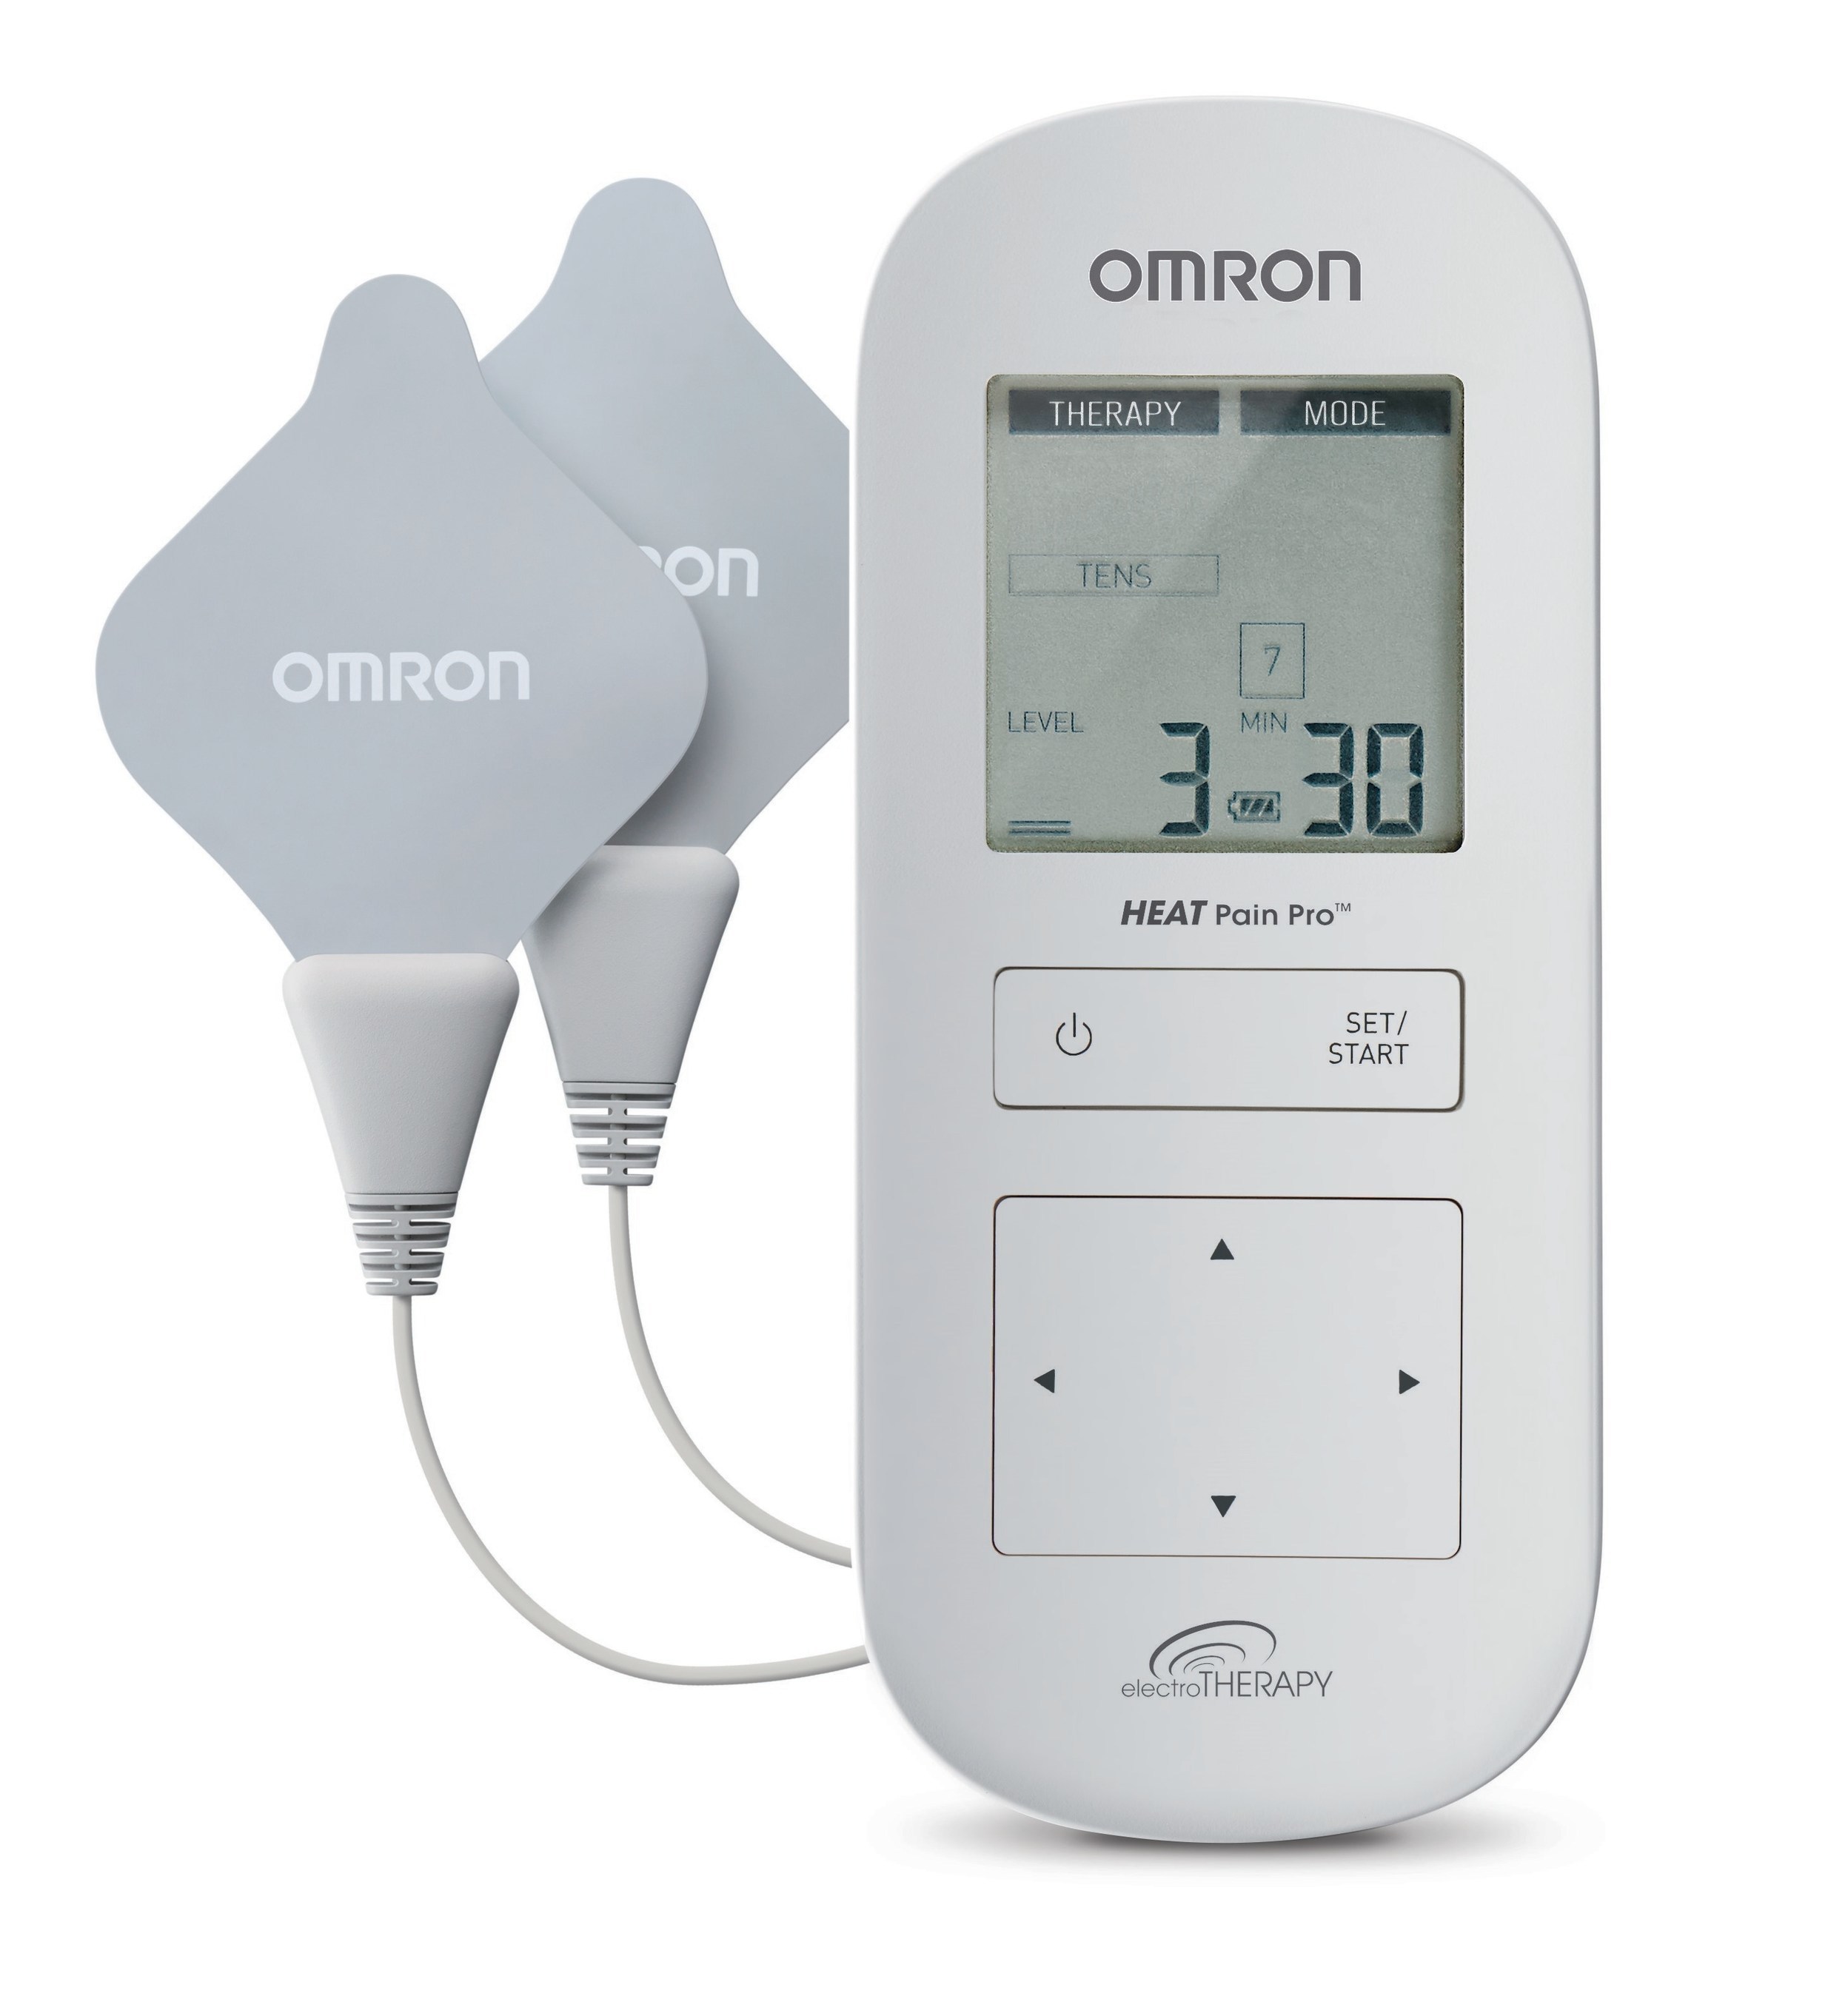 Omron Healthcare Introduces Its HEAT Pain Pro(TM) TENS Device To Help Millions With At-Home Personal Pain Management